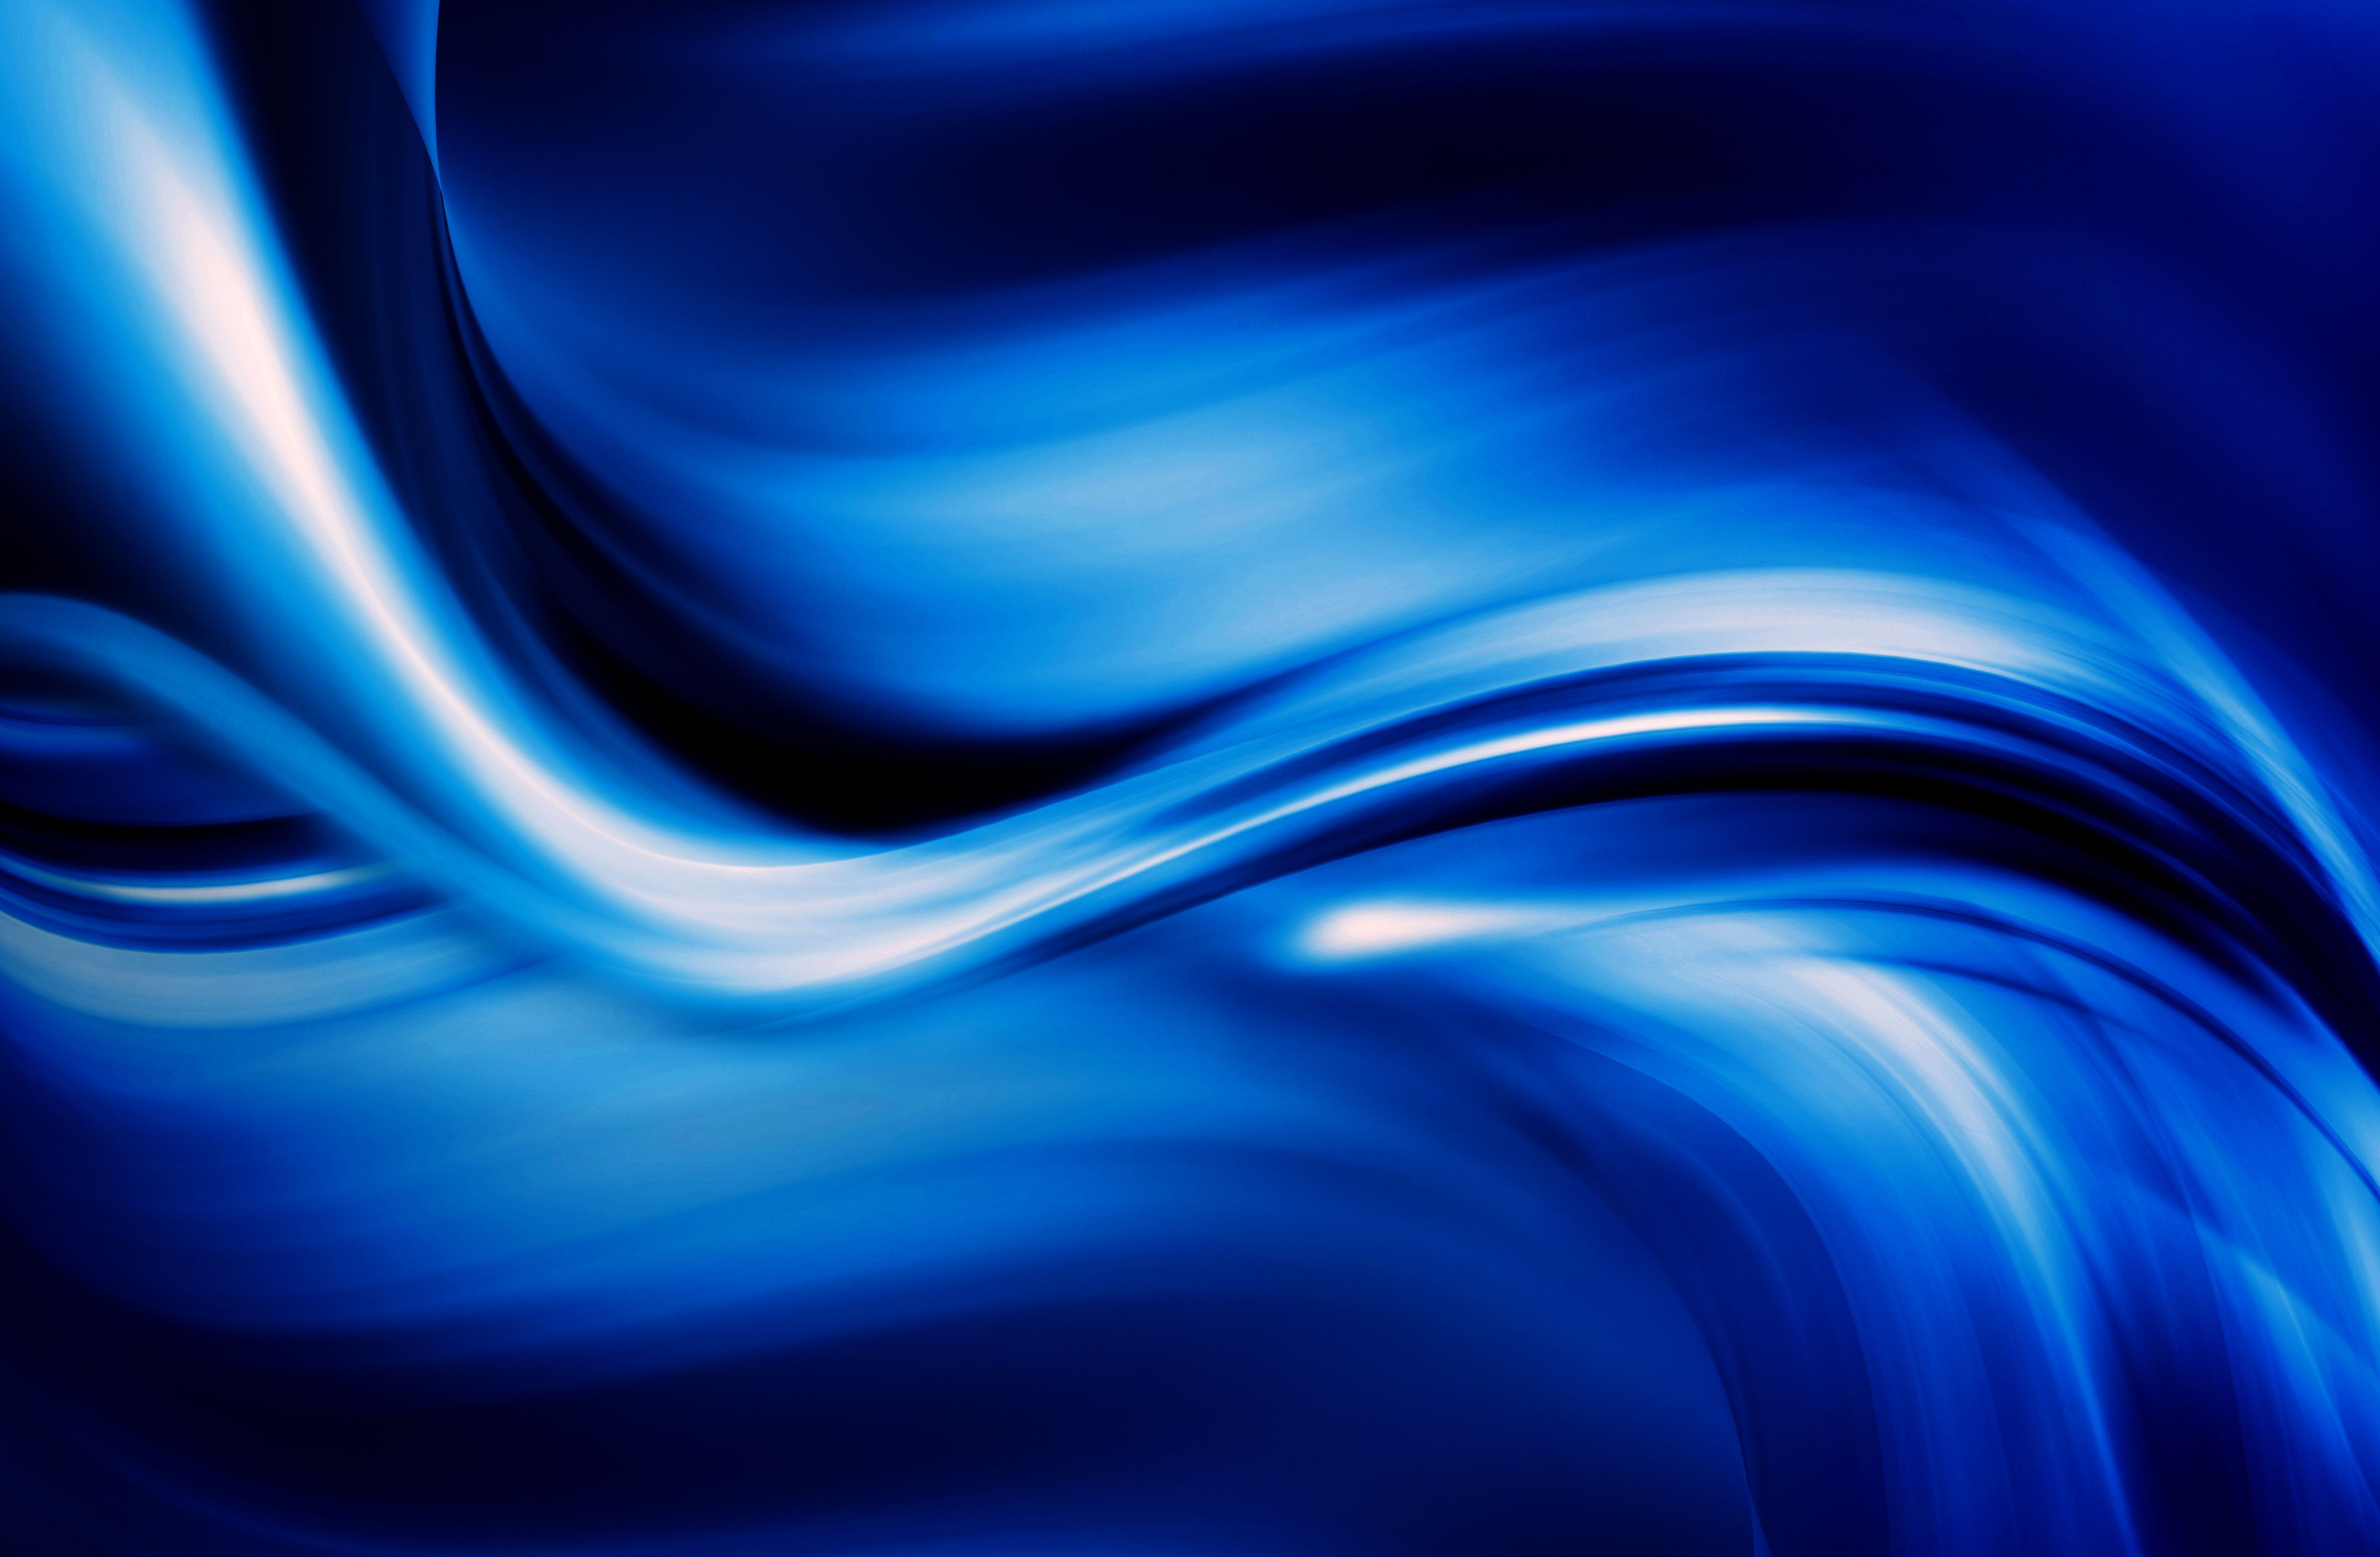 Another dark blue abstract background texture image | www